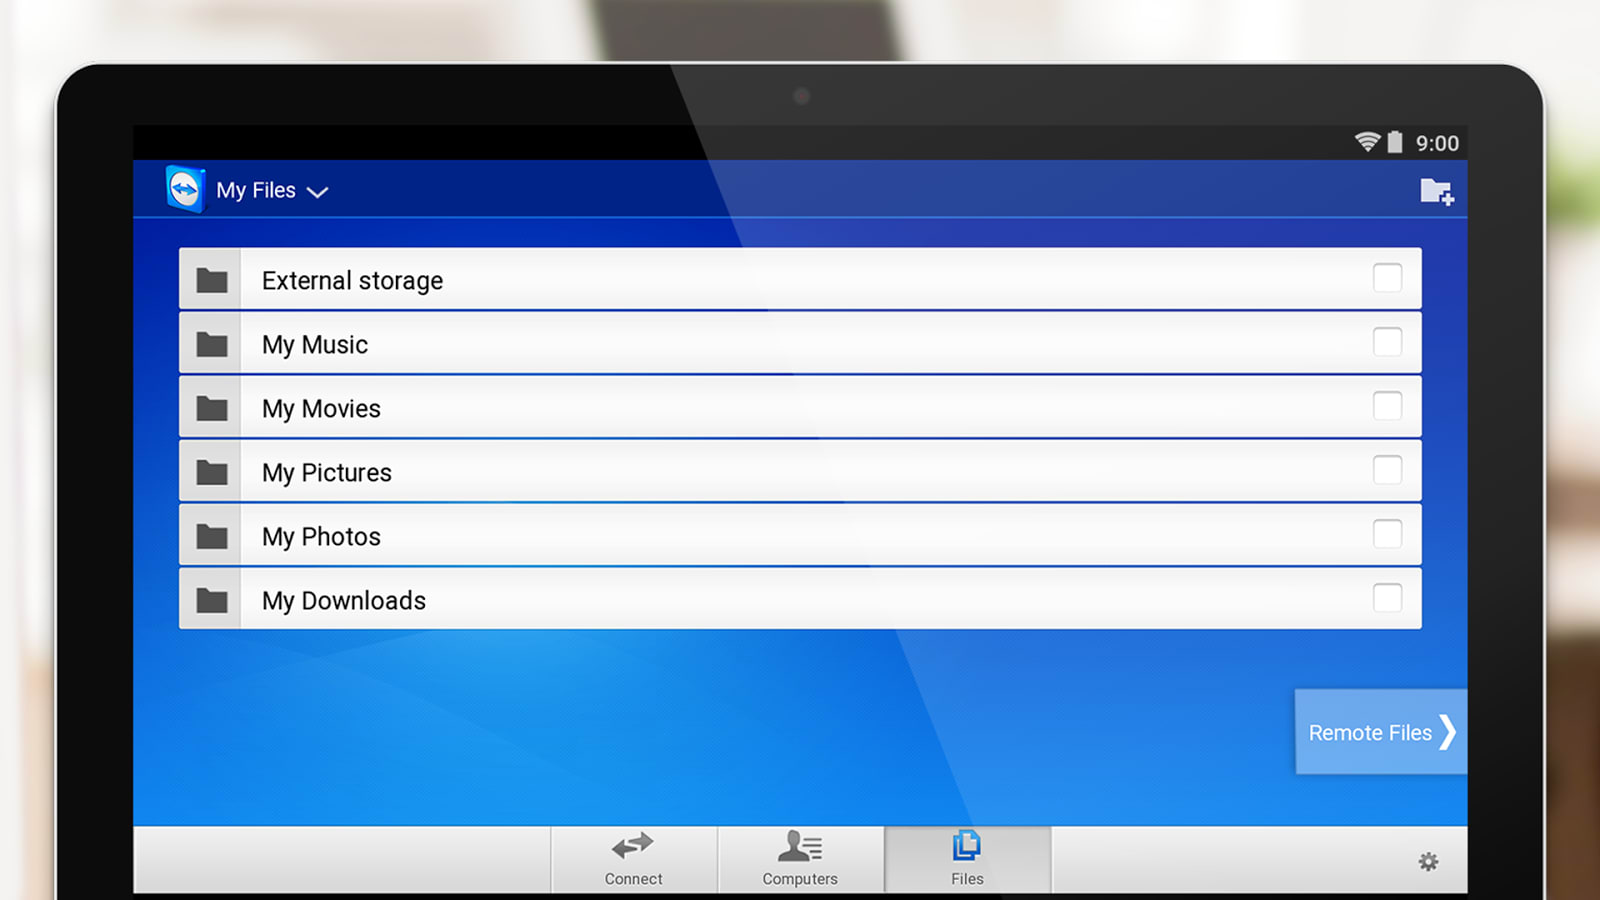 download teamviewer for android 2.1